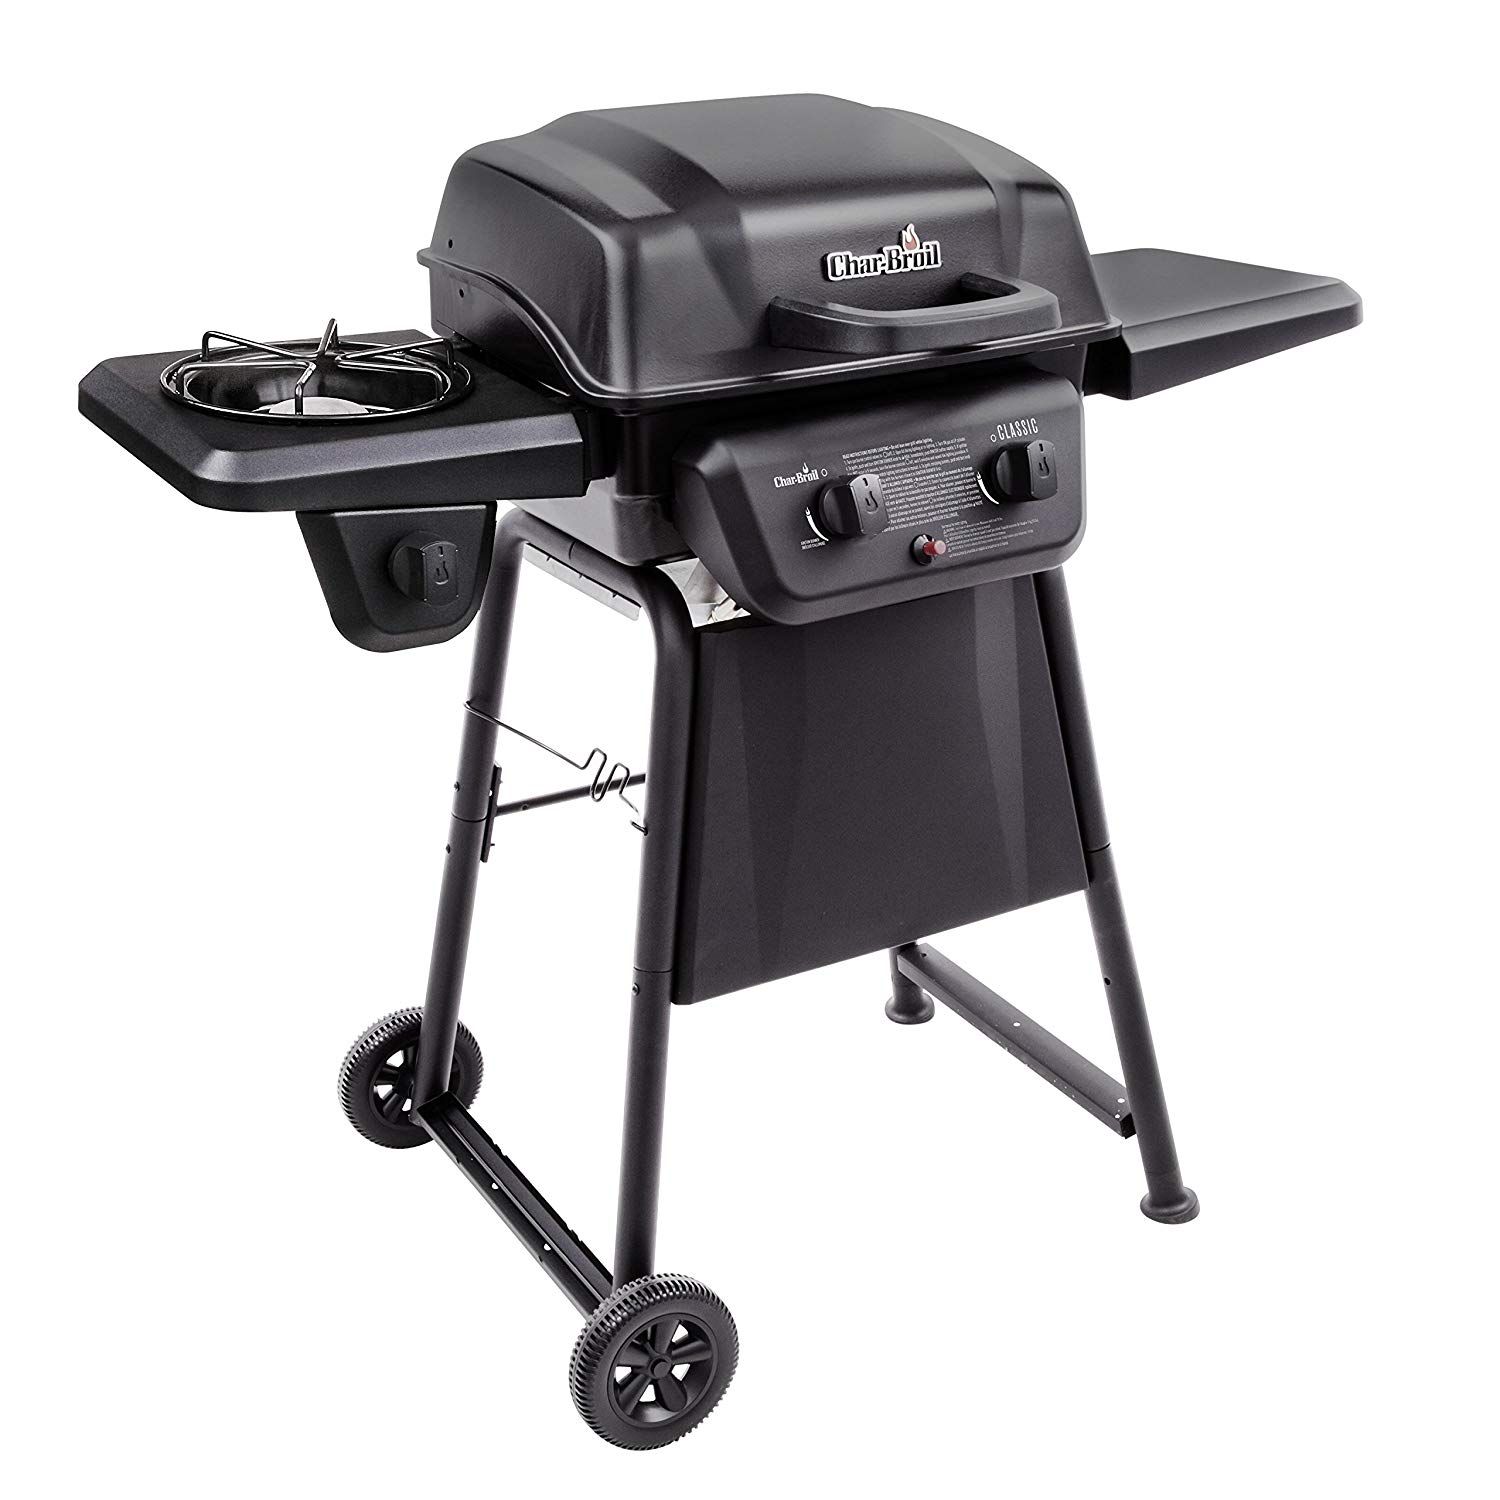 Propane For Grills Prices - Buy Electric, Charcoal and Propane Grills At Best Prices